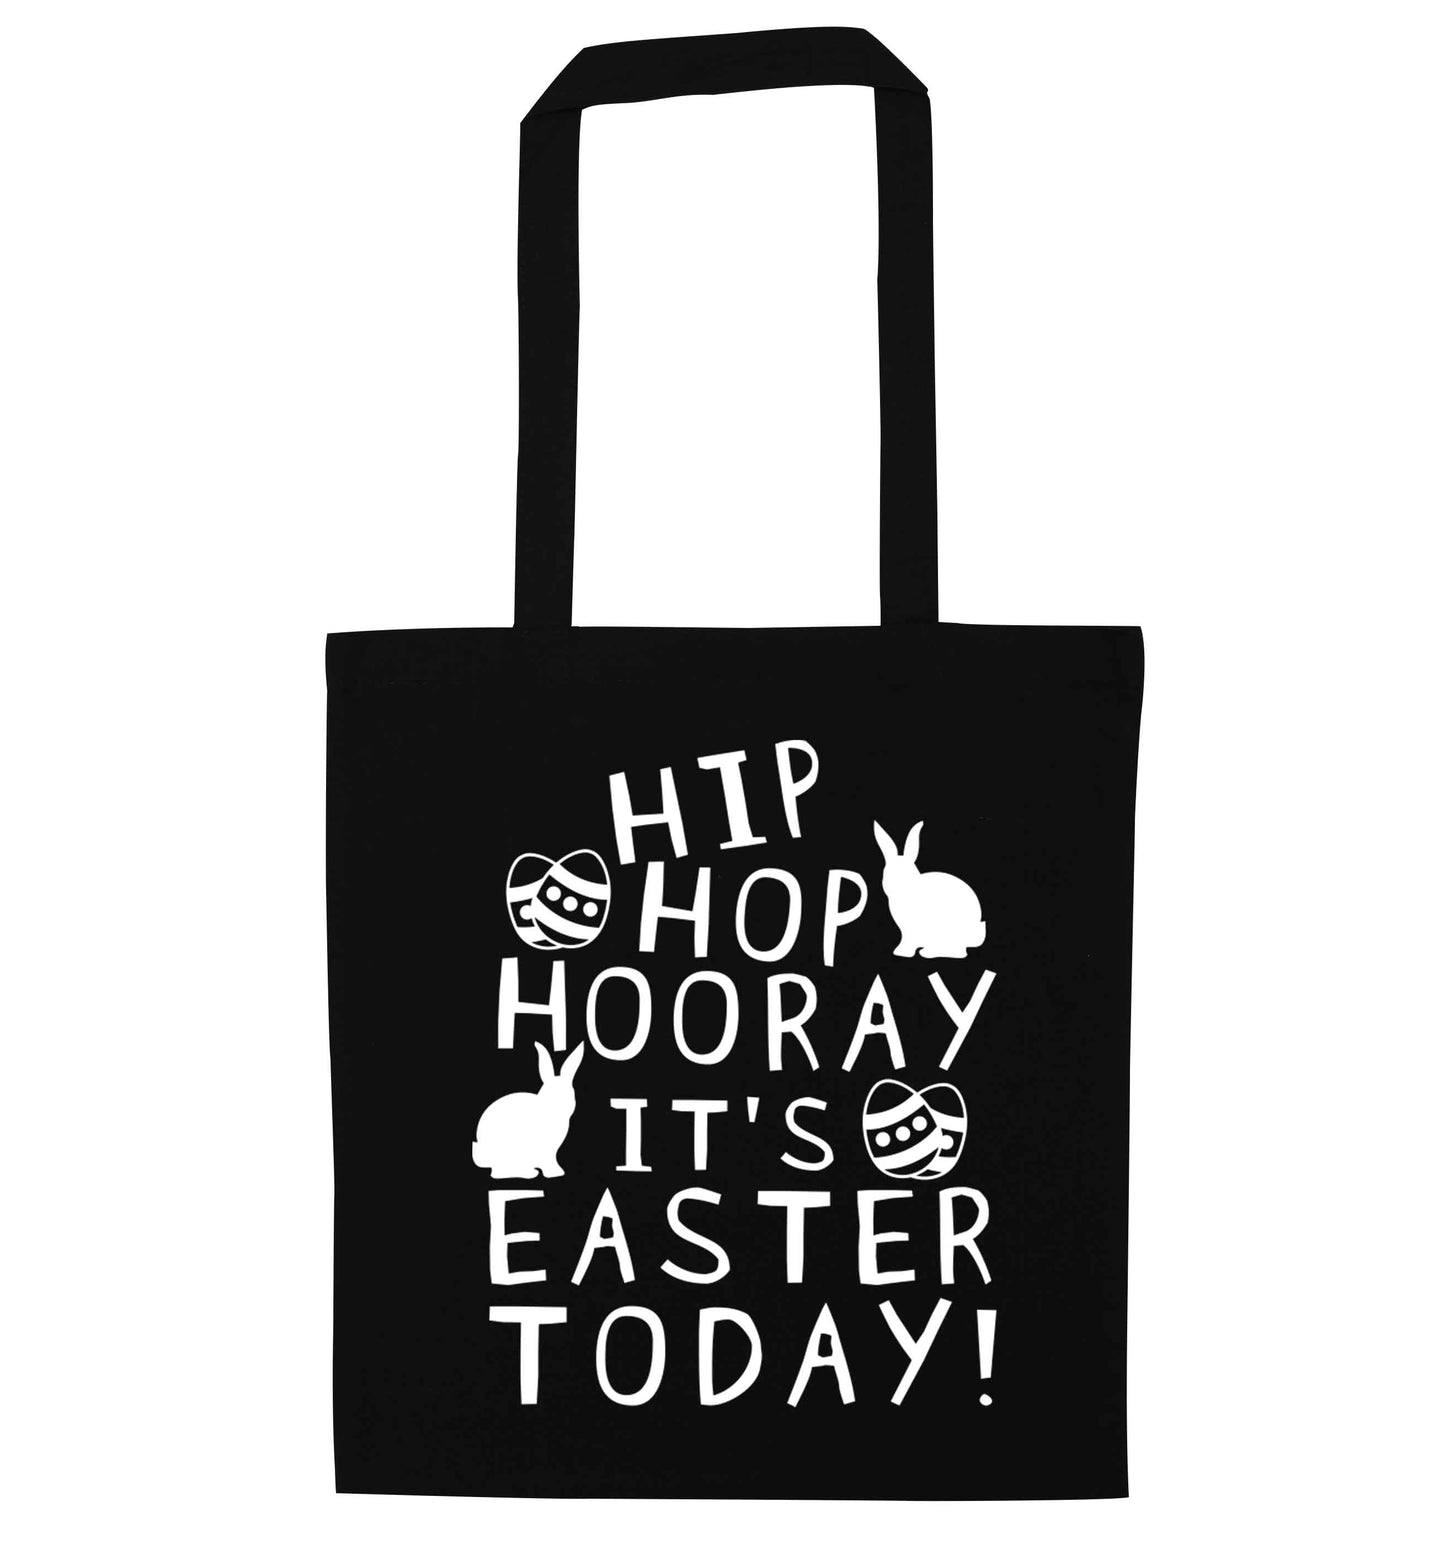 Hip hip hooray it's Easter today! black tote bag